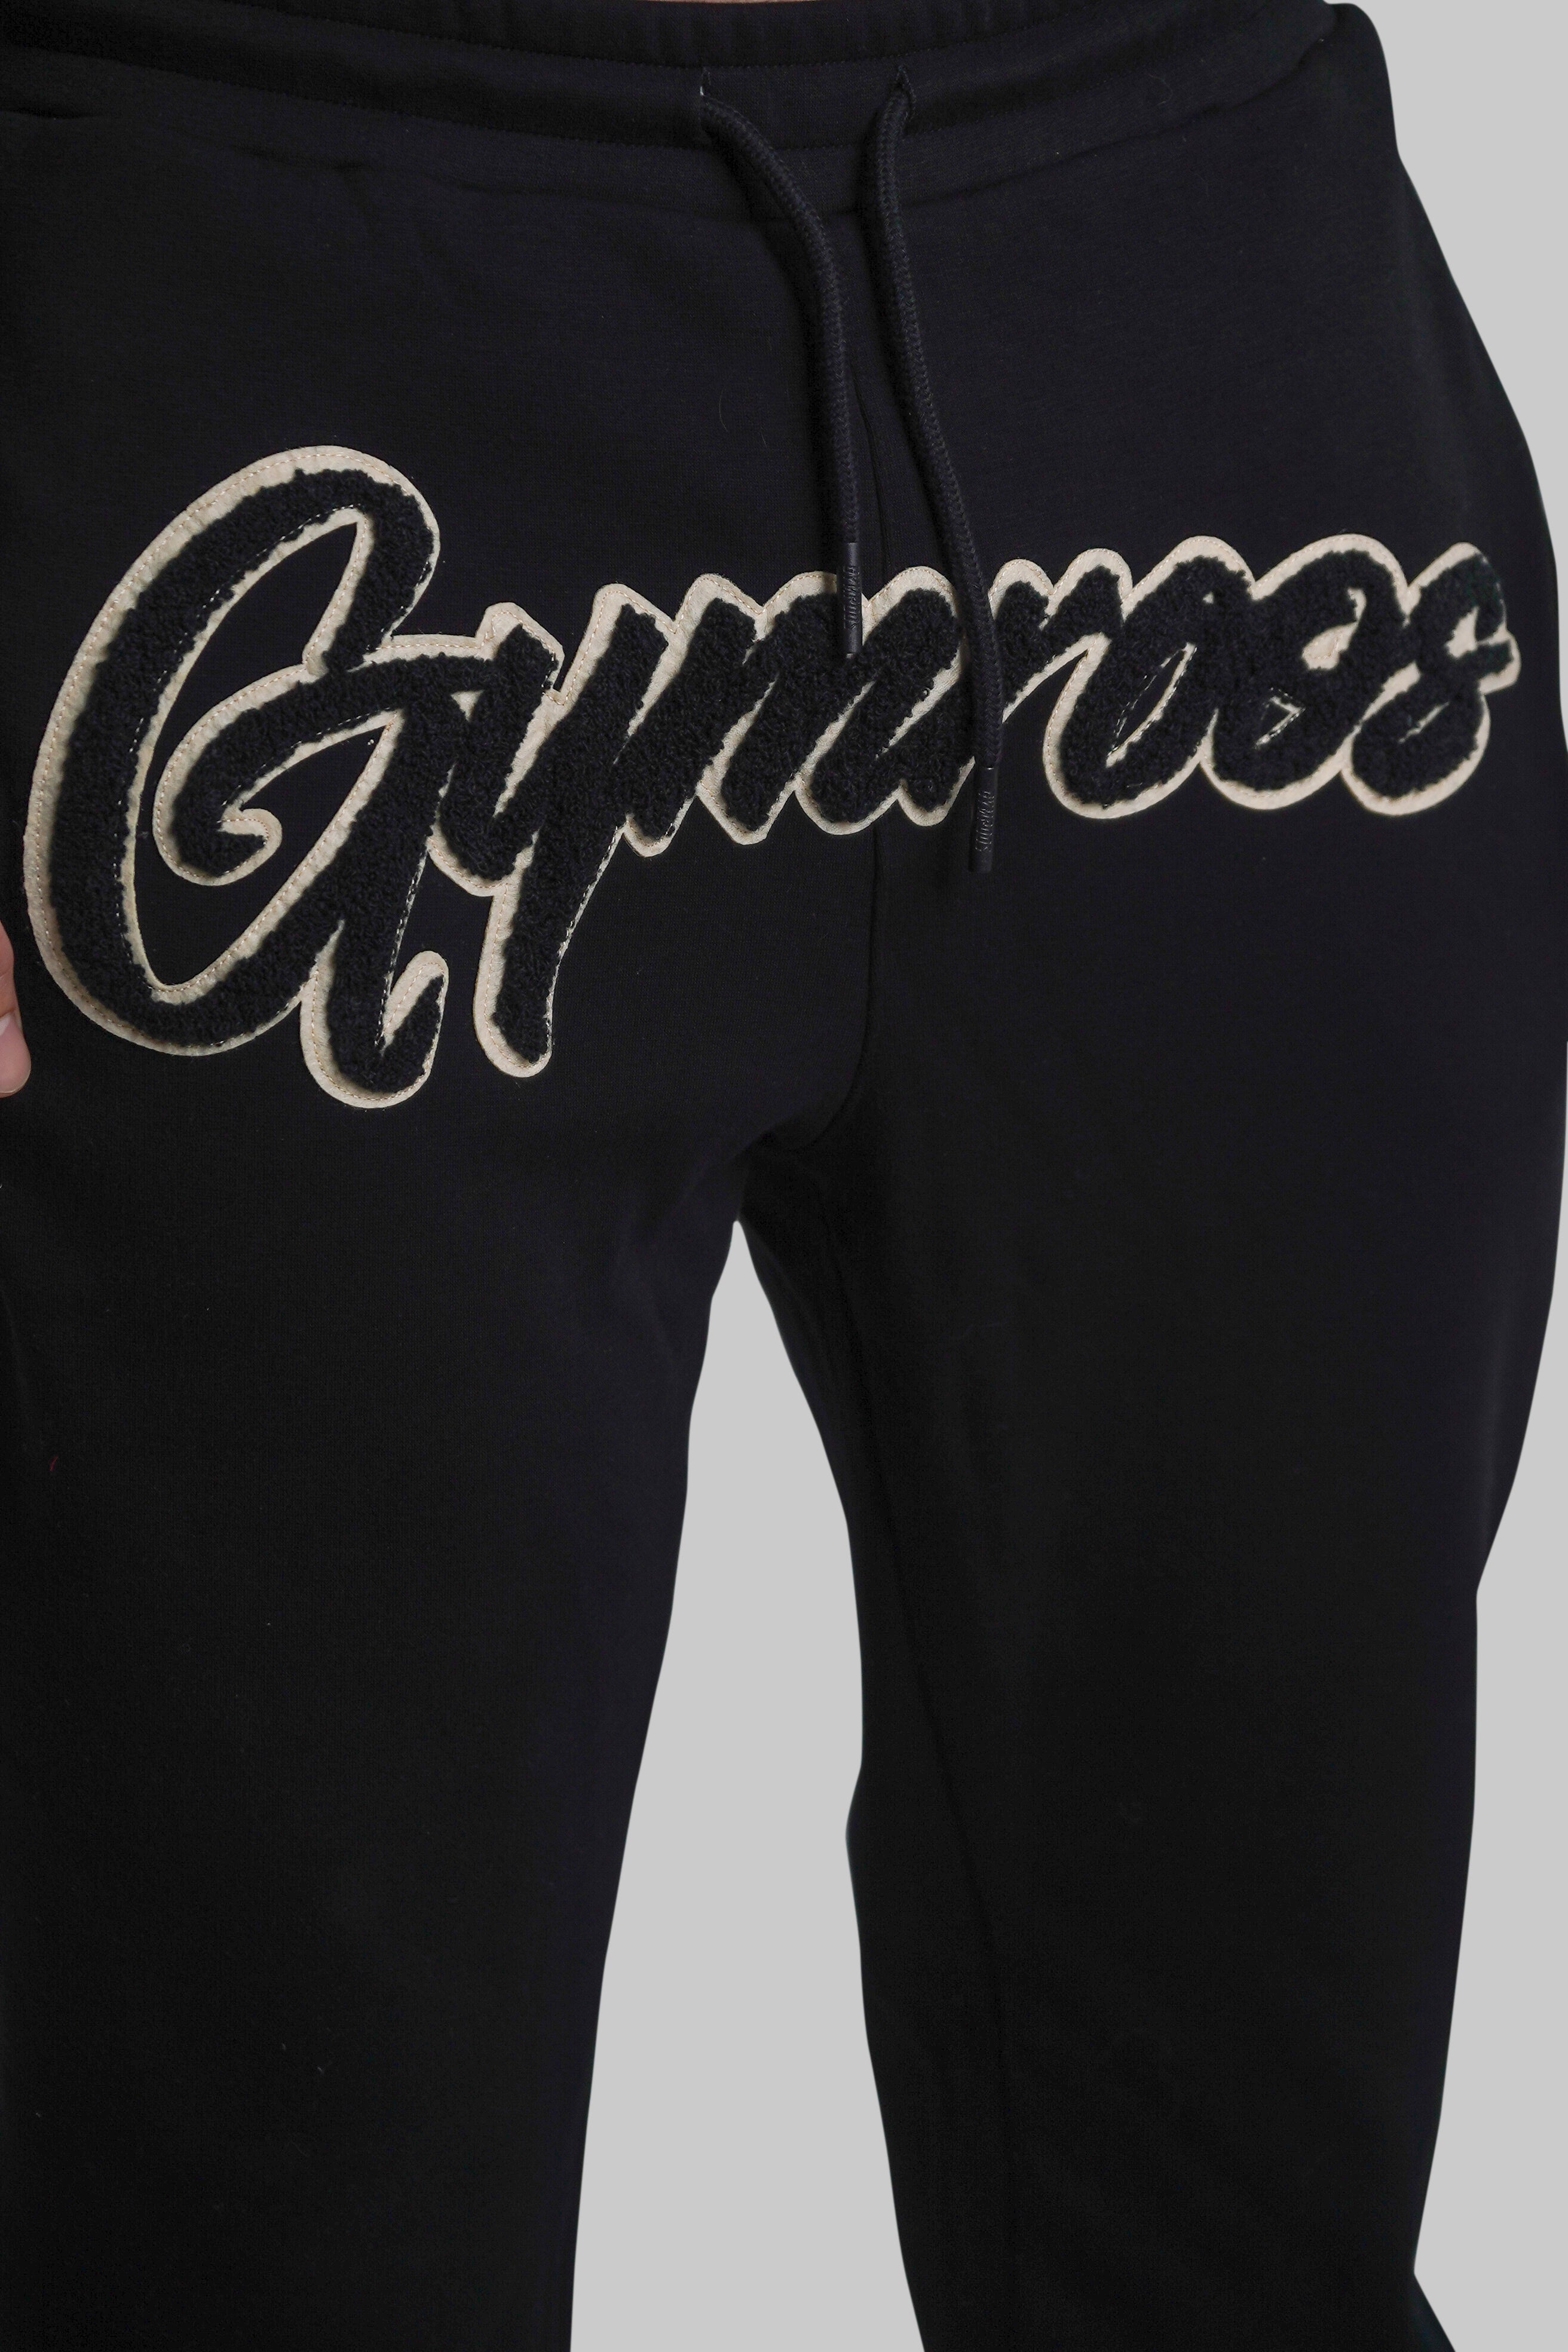 Team G Joggers - Black (LIMITED EDITION) - GYMROOS